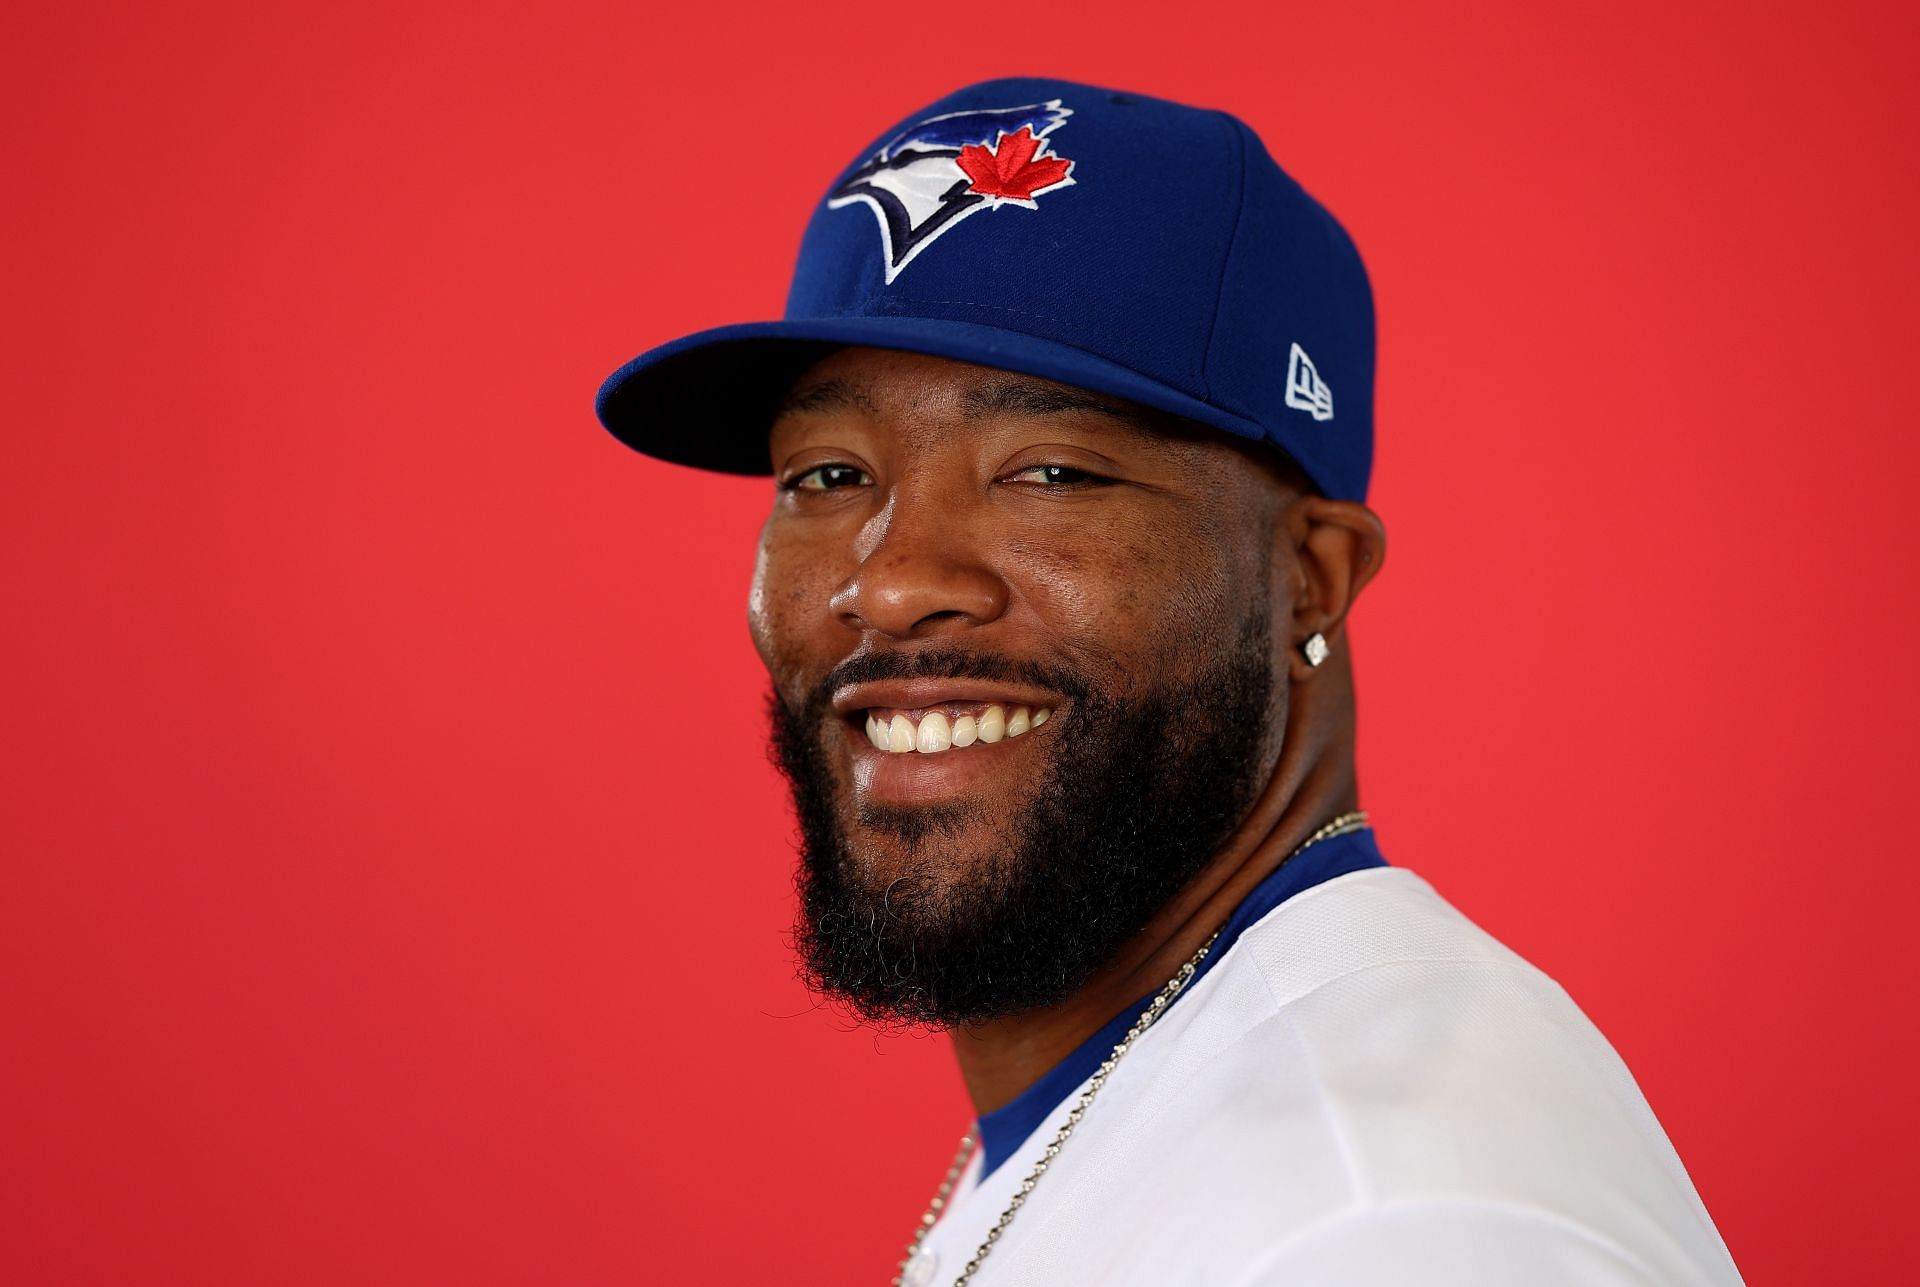 MLB fans roast Jay Jackson after Blue Jays flamethrower admits he may